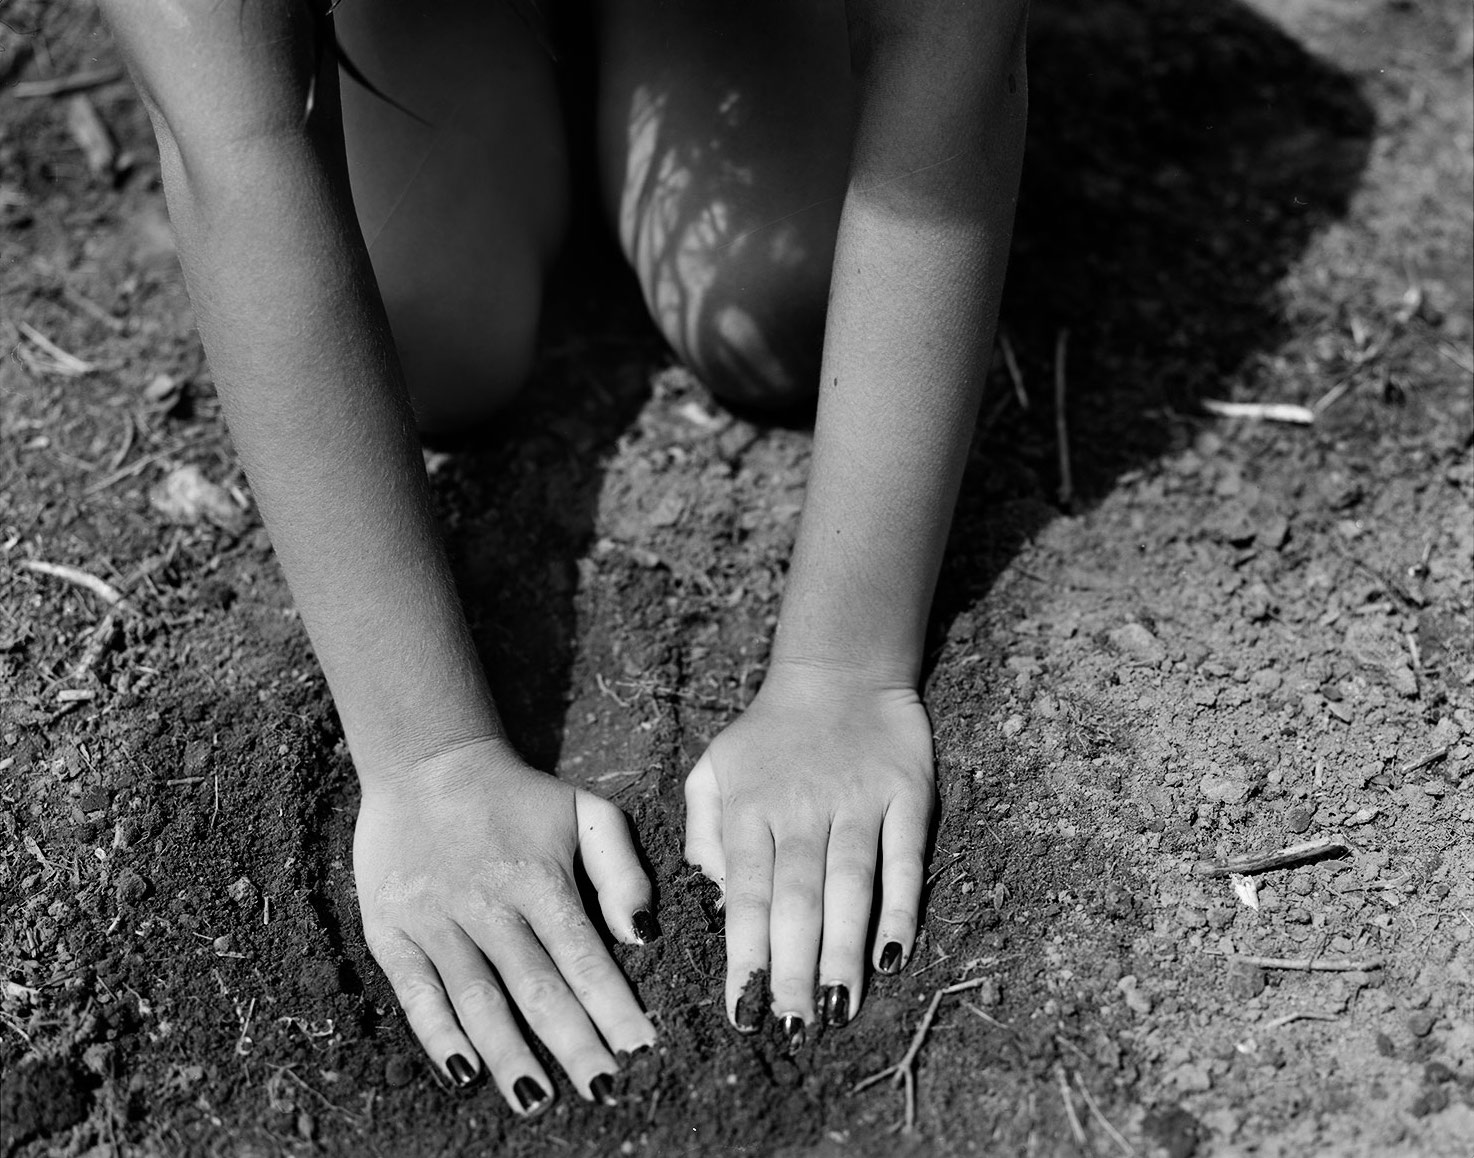 A young person with painted nails pressing their palms into the dirt.